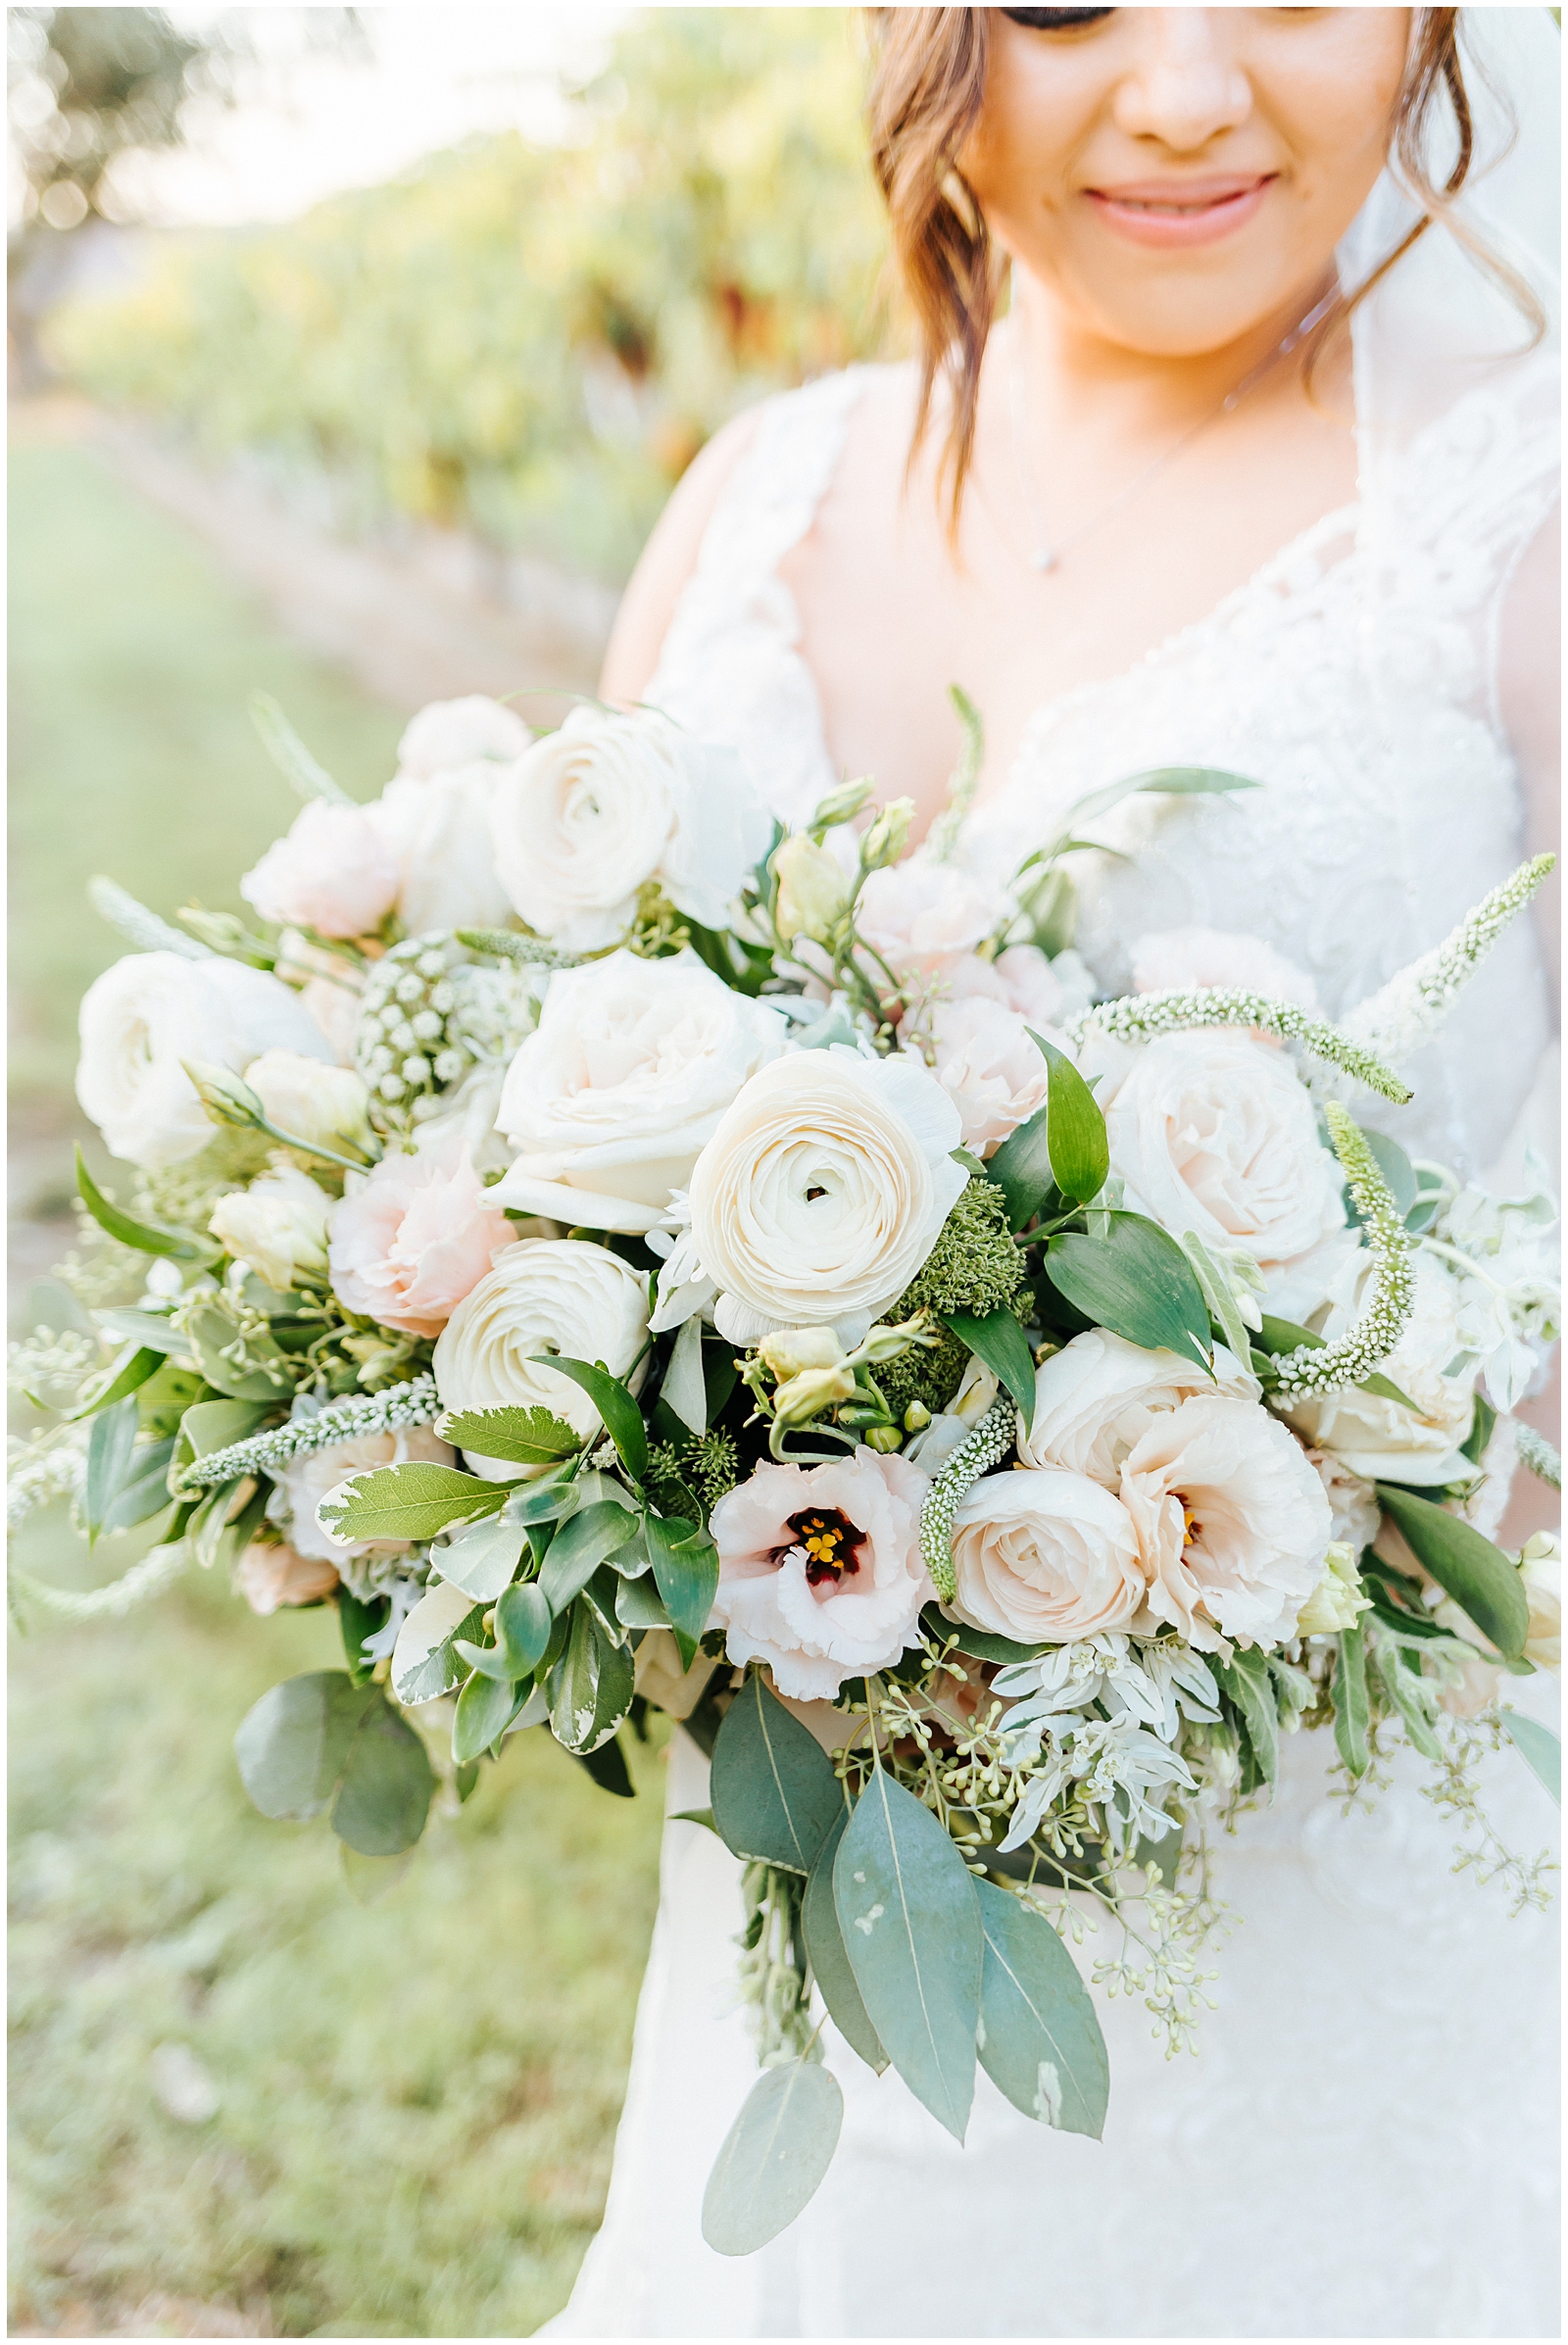 Bridal Bouquet with White, Cream, and Blush Roses